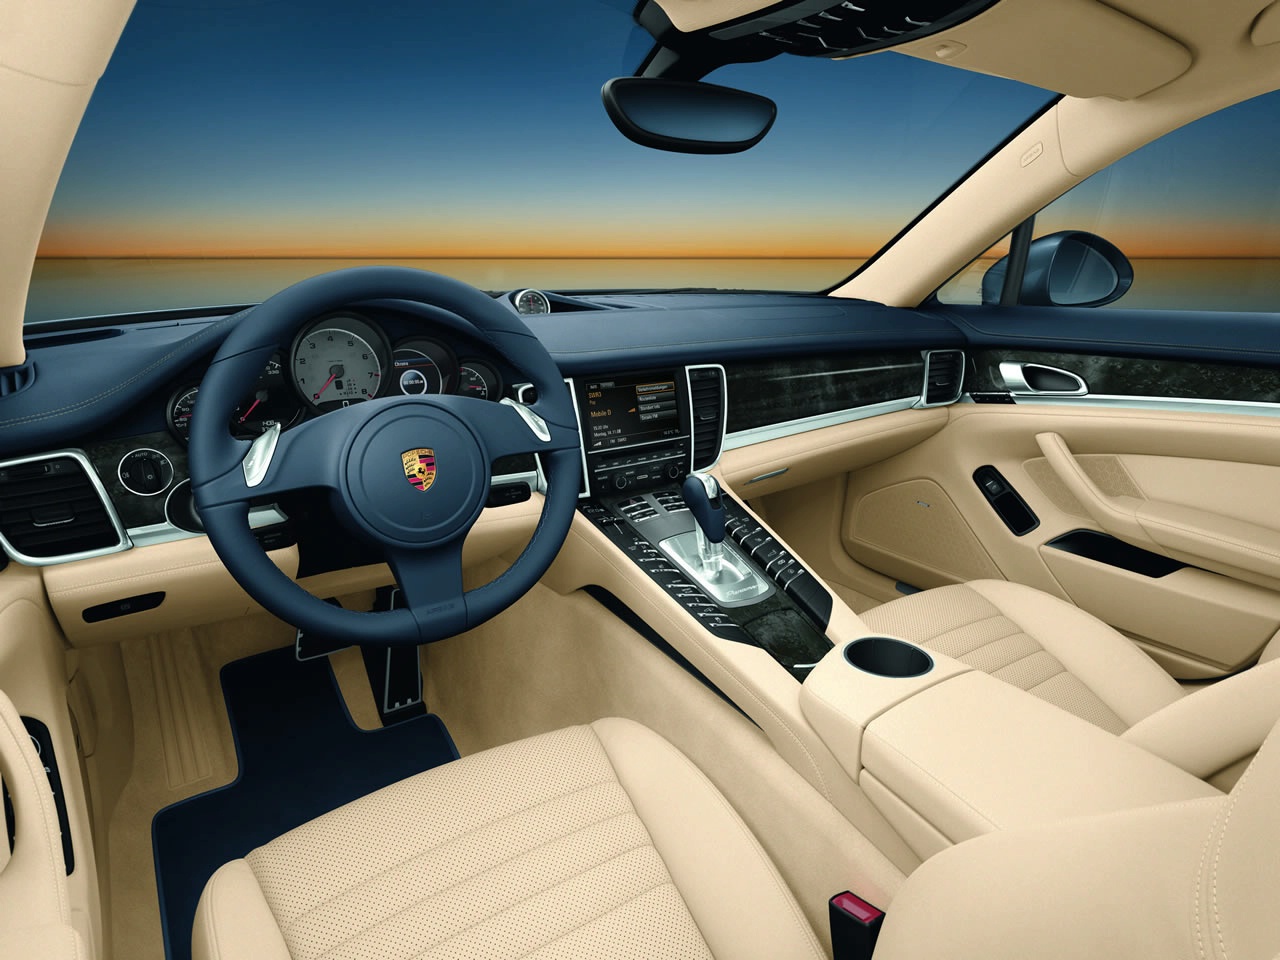 2016 Porsche Panamera Wallpapers Full HD Pictures